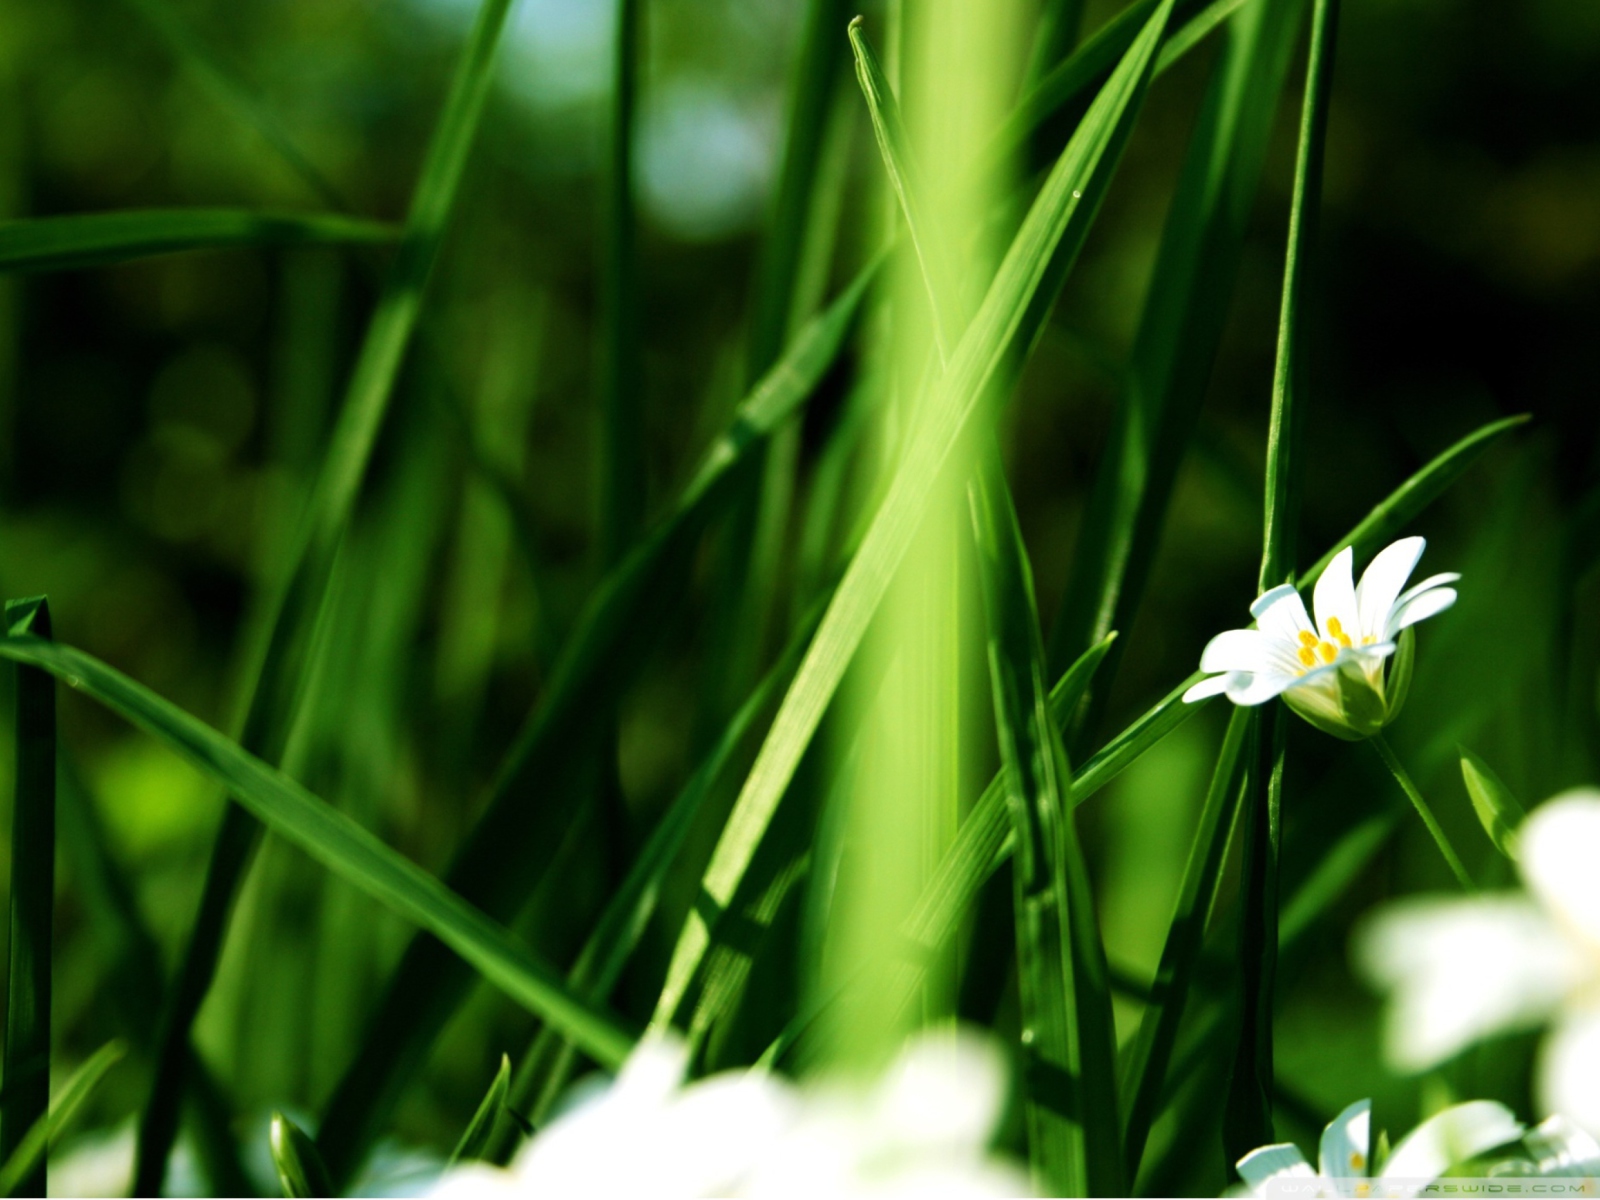 Grass And White Flowers wallpaper 1600x1200